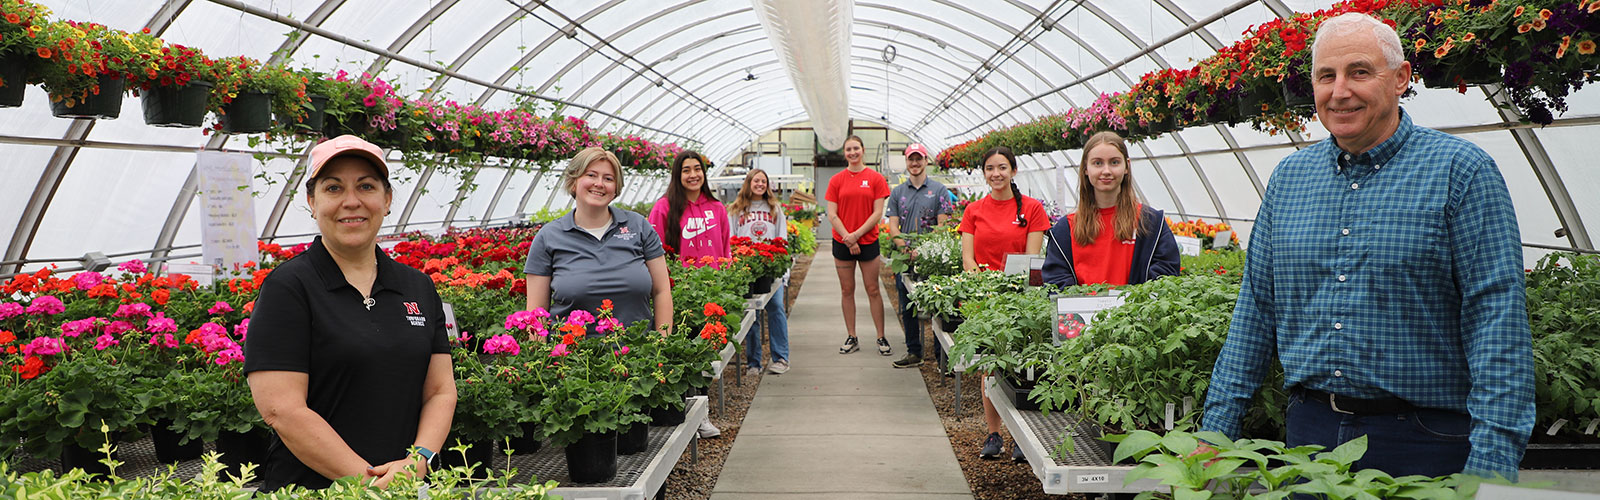 Horticulture Club and advisers in the greenhouse